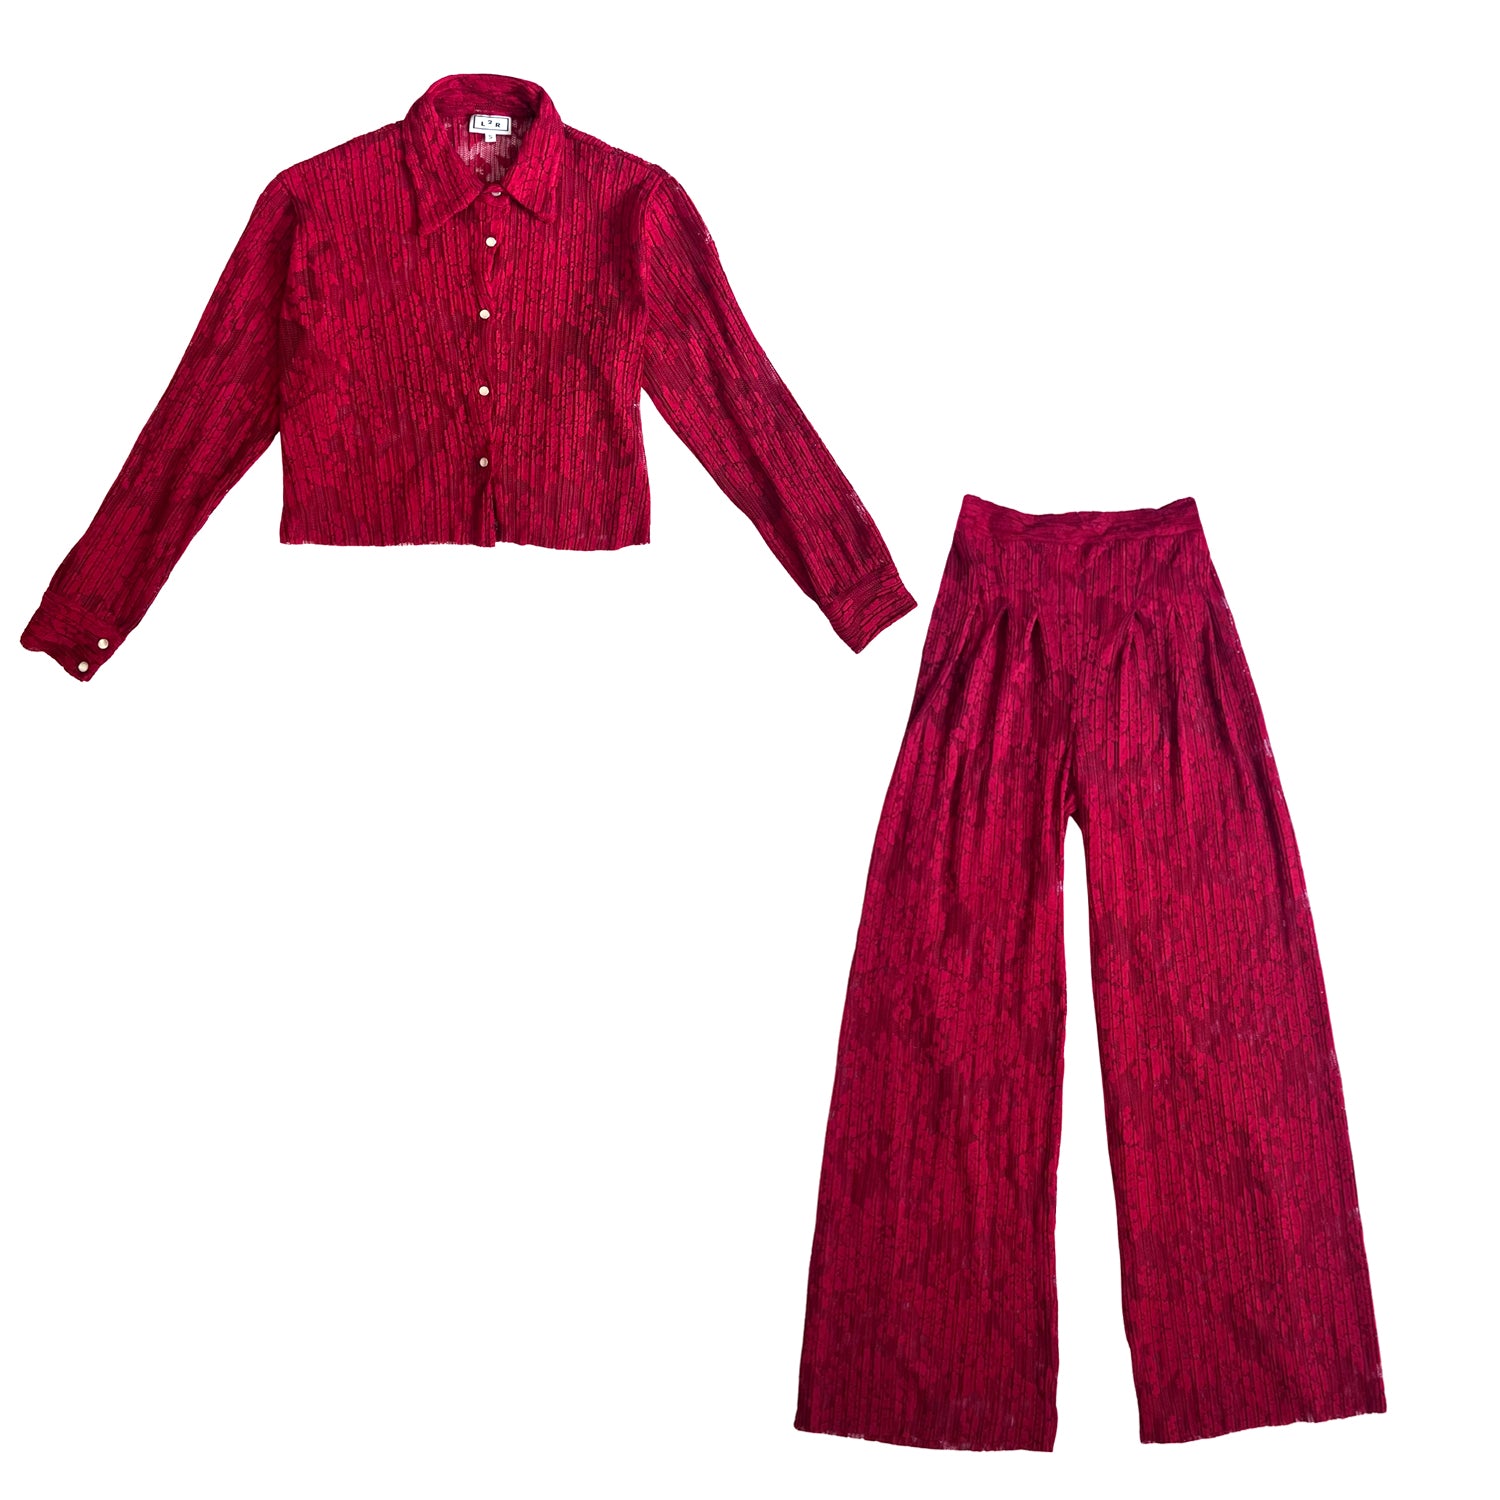 Cropped Pleated Shirt in Red Lace